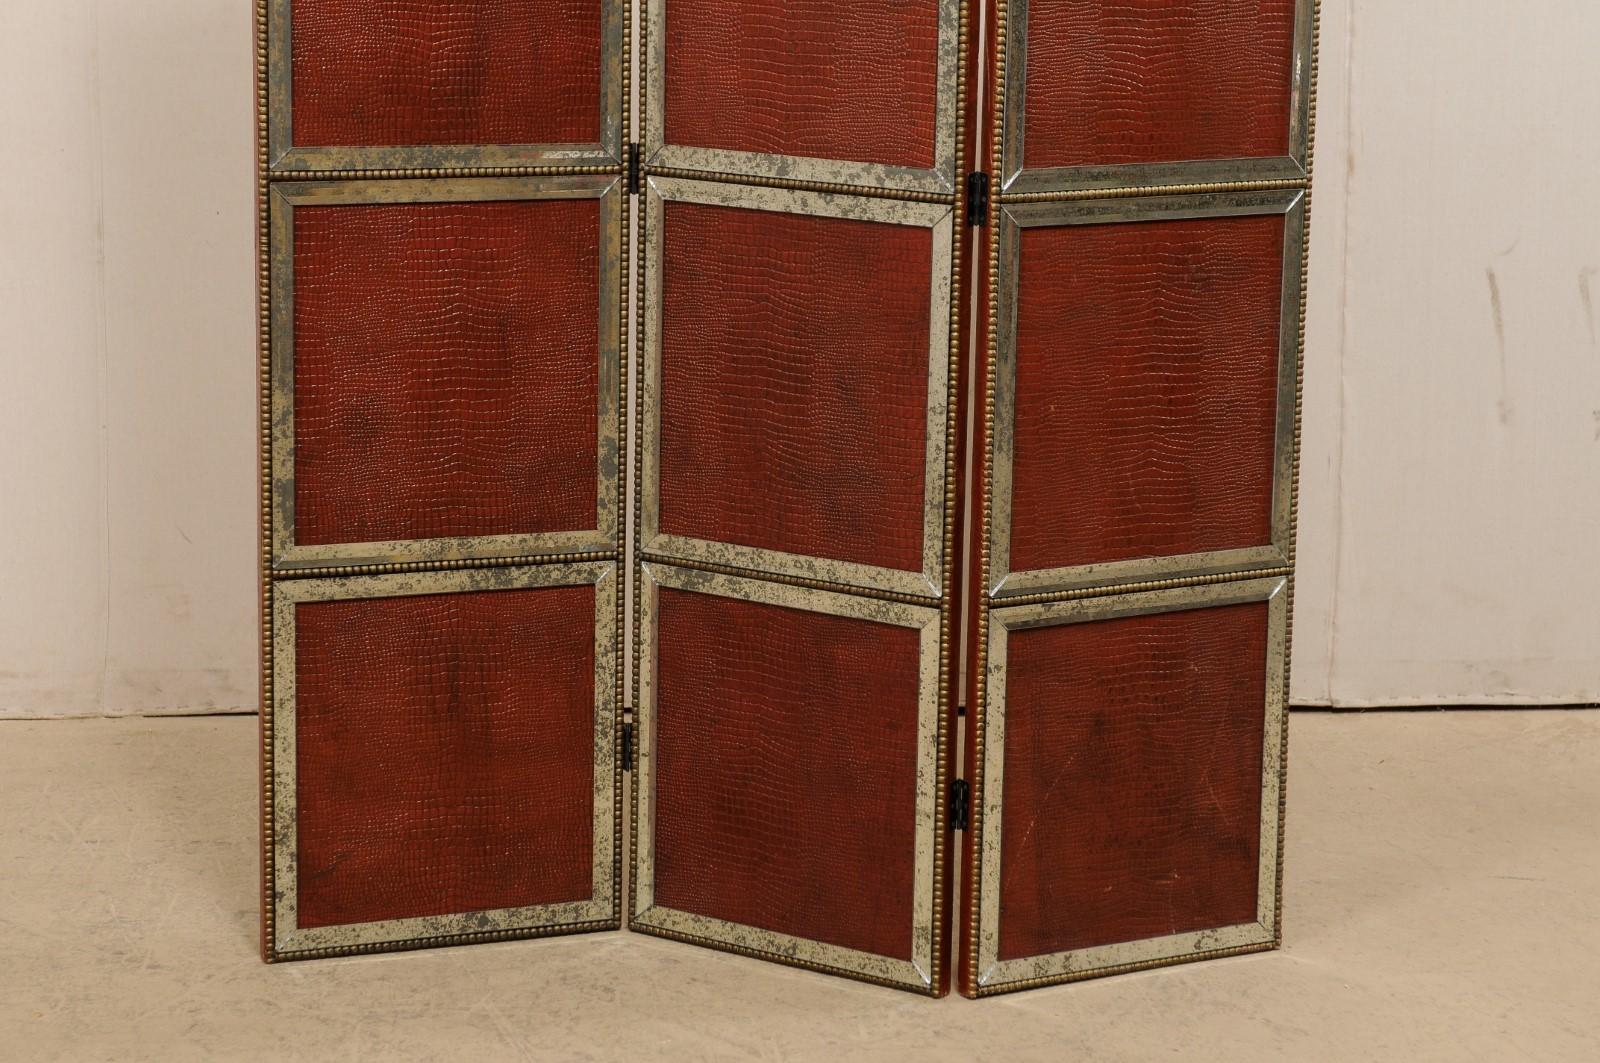 20th Century French Accordion Style Folding Screen, Textured Leather & Mirrored Glass